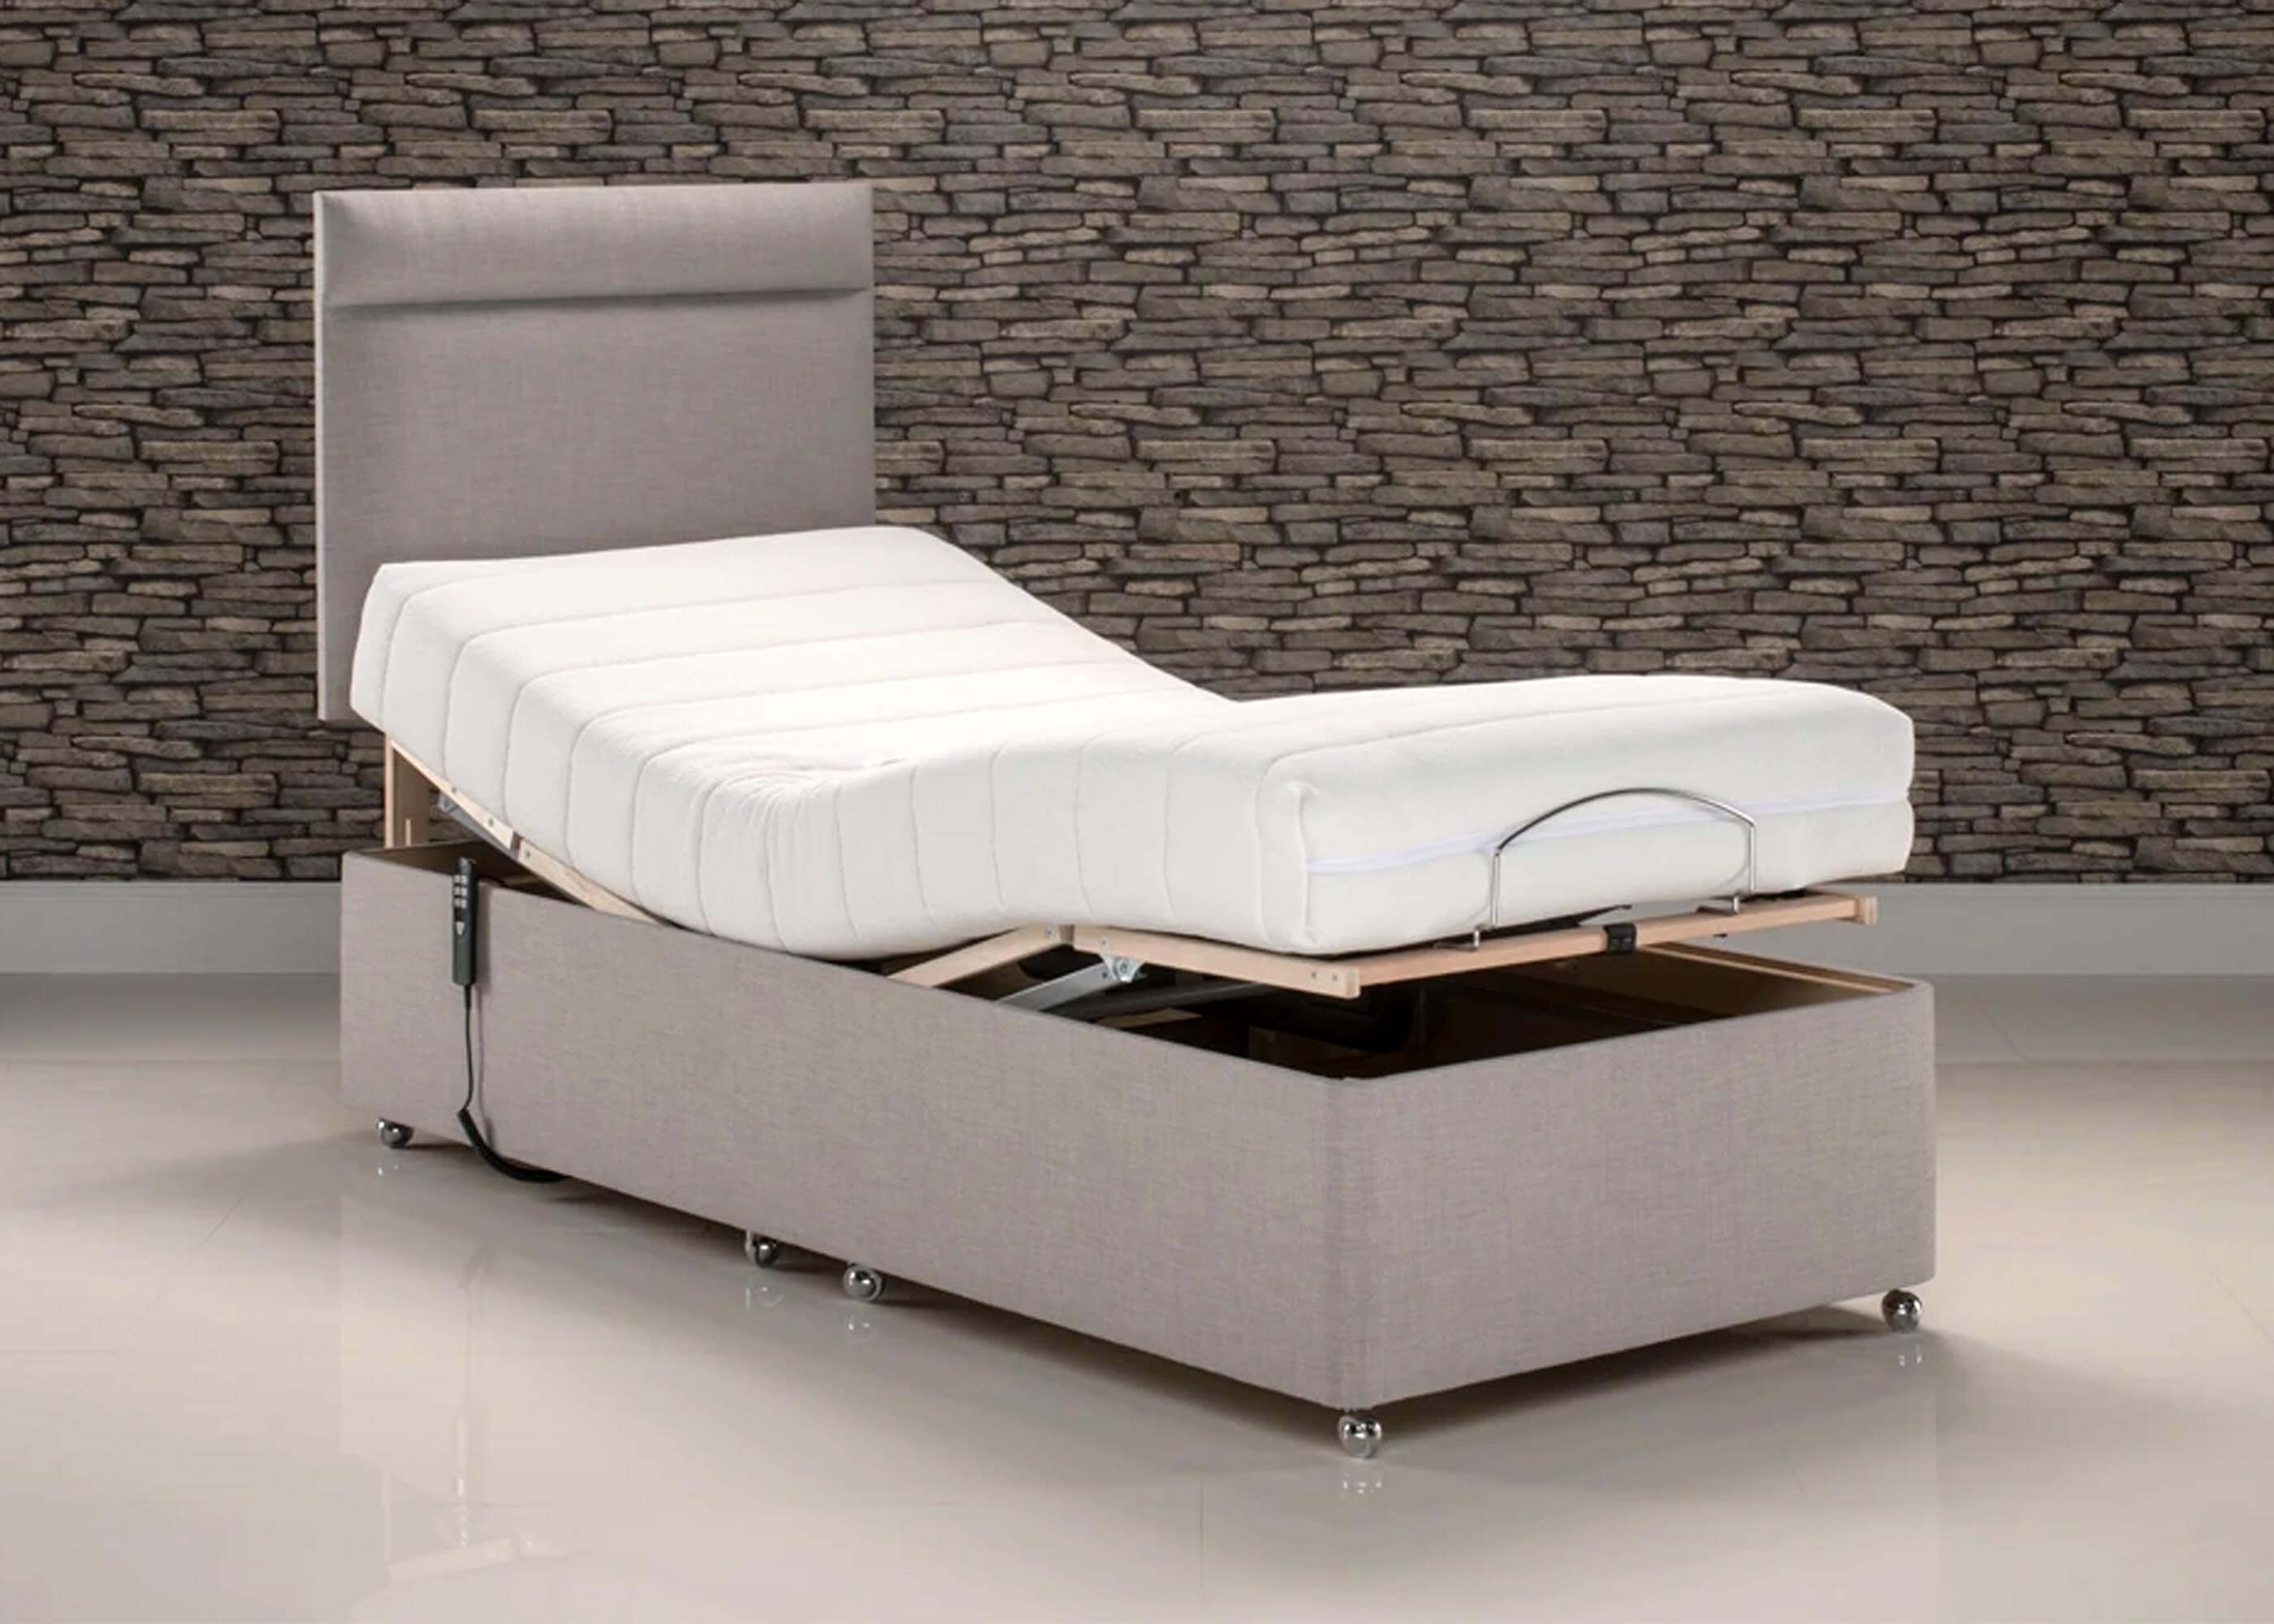 Denver Heavy Duty Adjustable Bed With Mattress Reinforced Beds